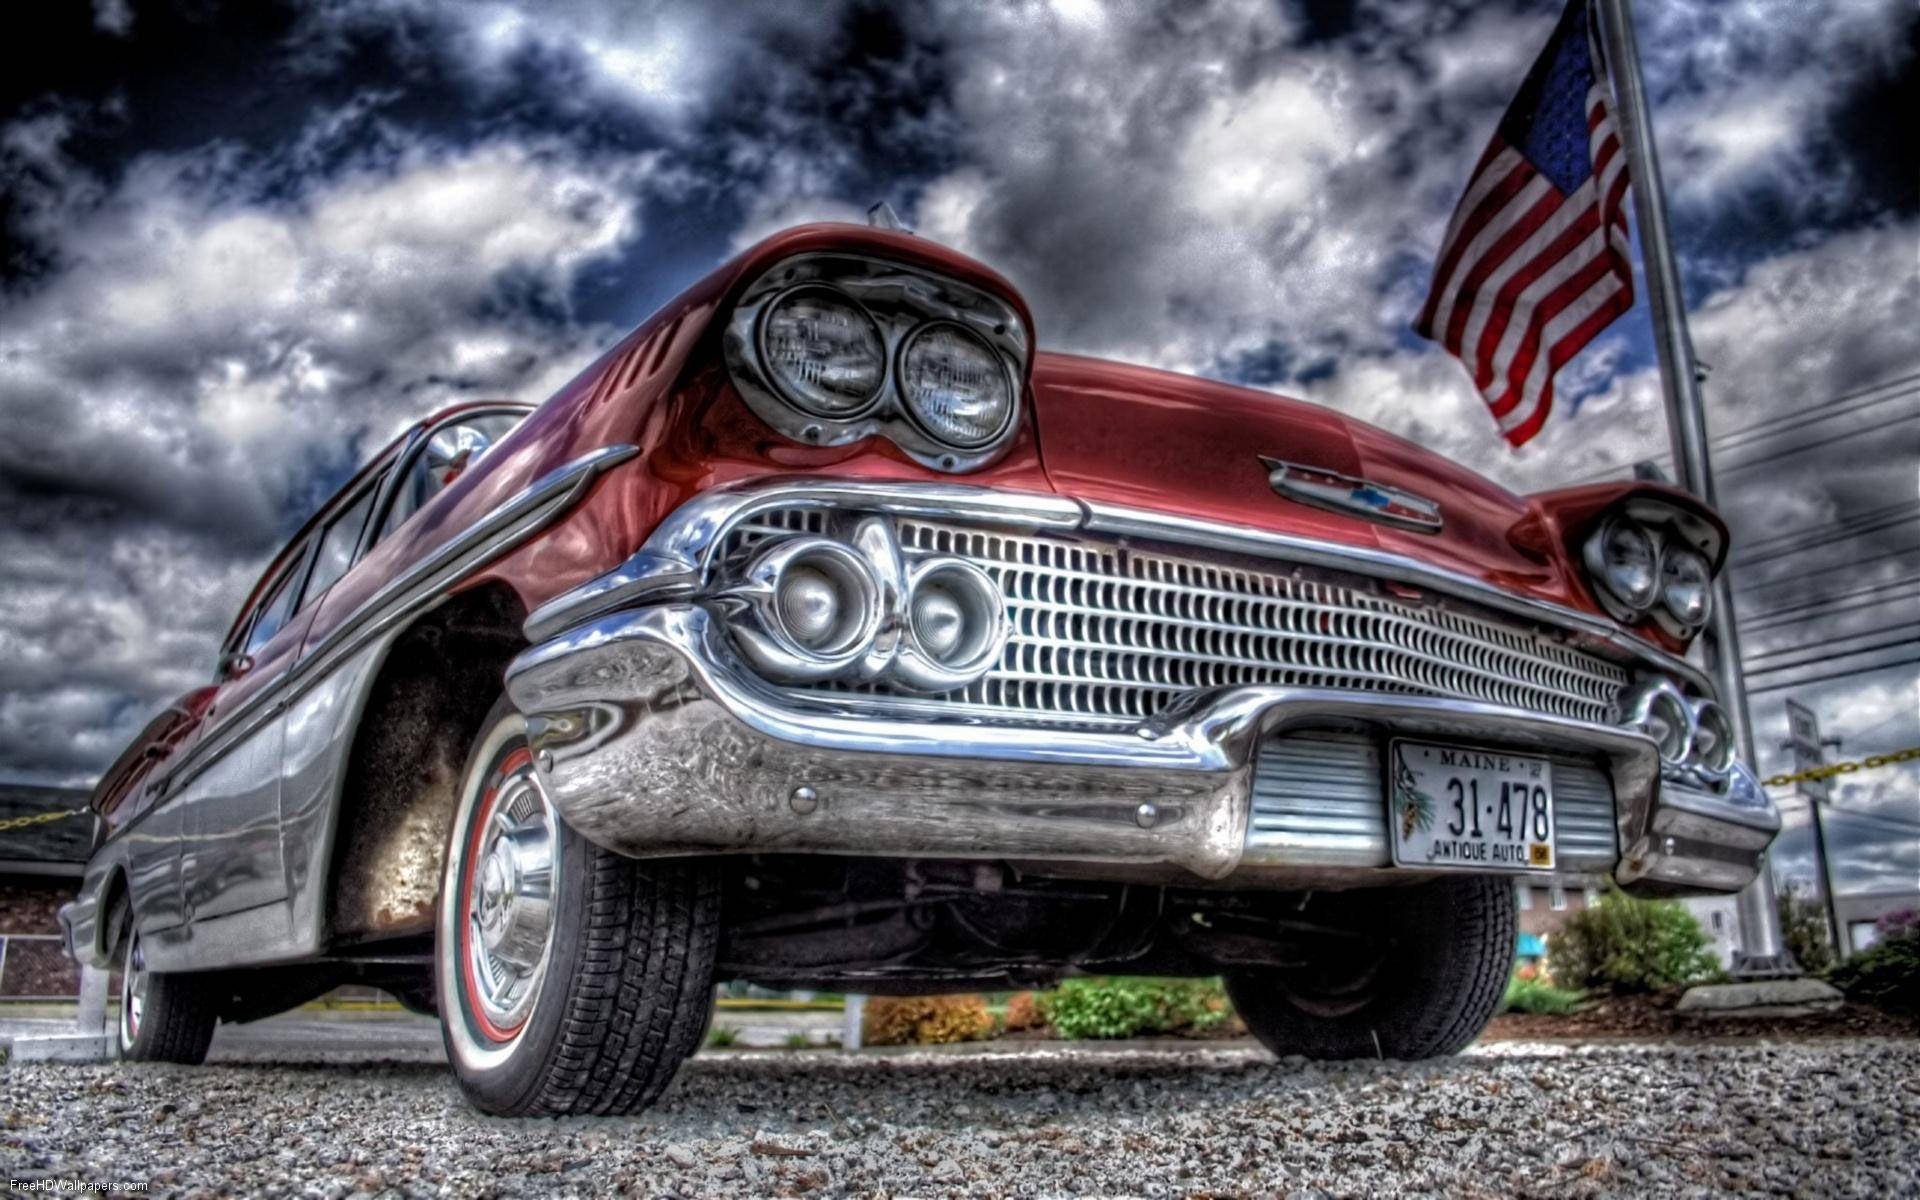 A classic car is parked in front of an american flag - 60s